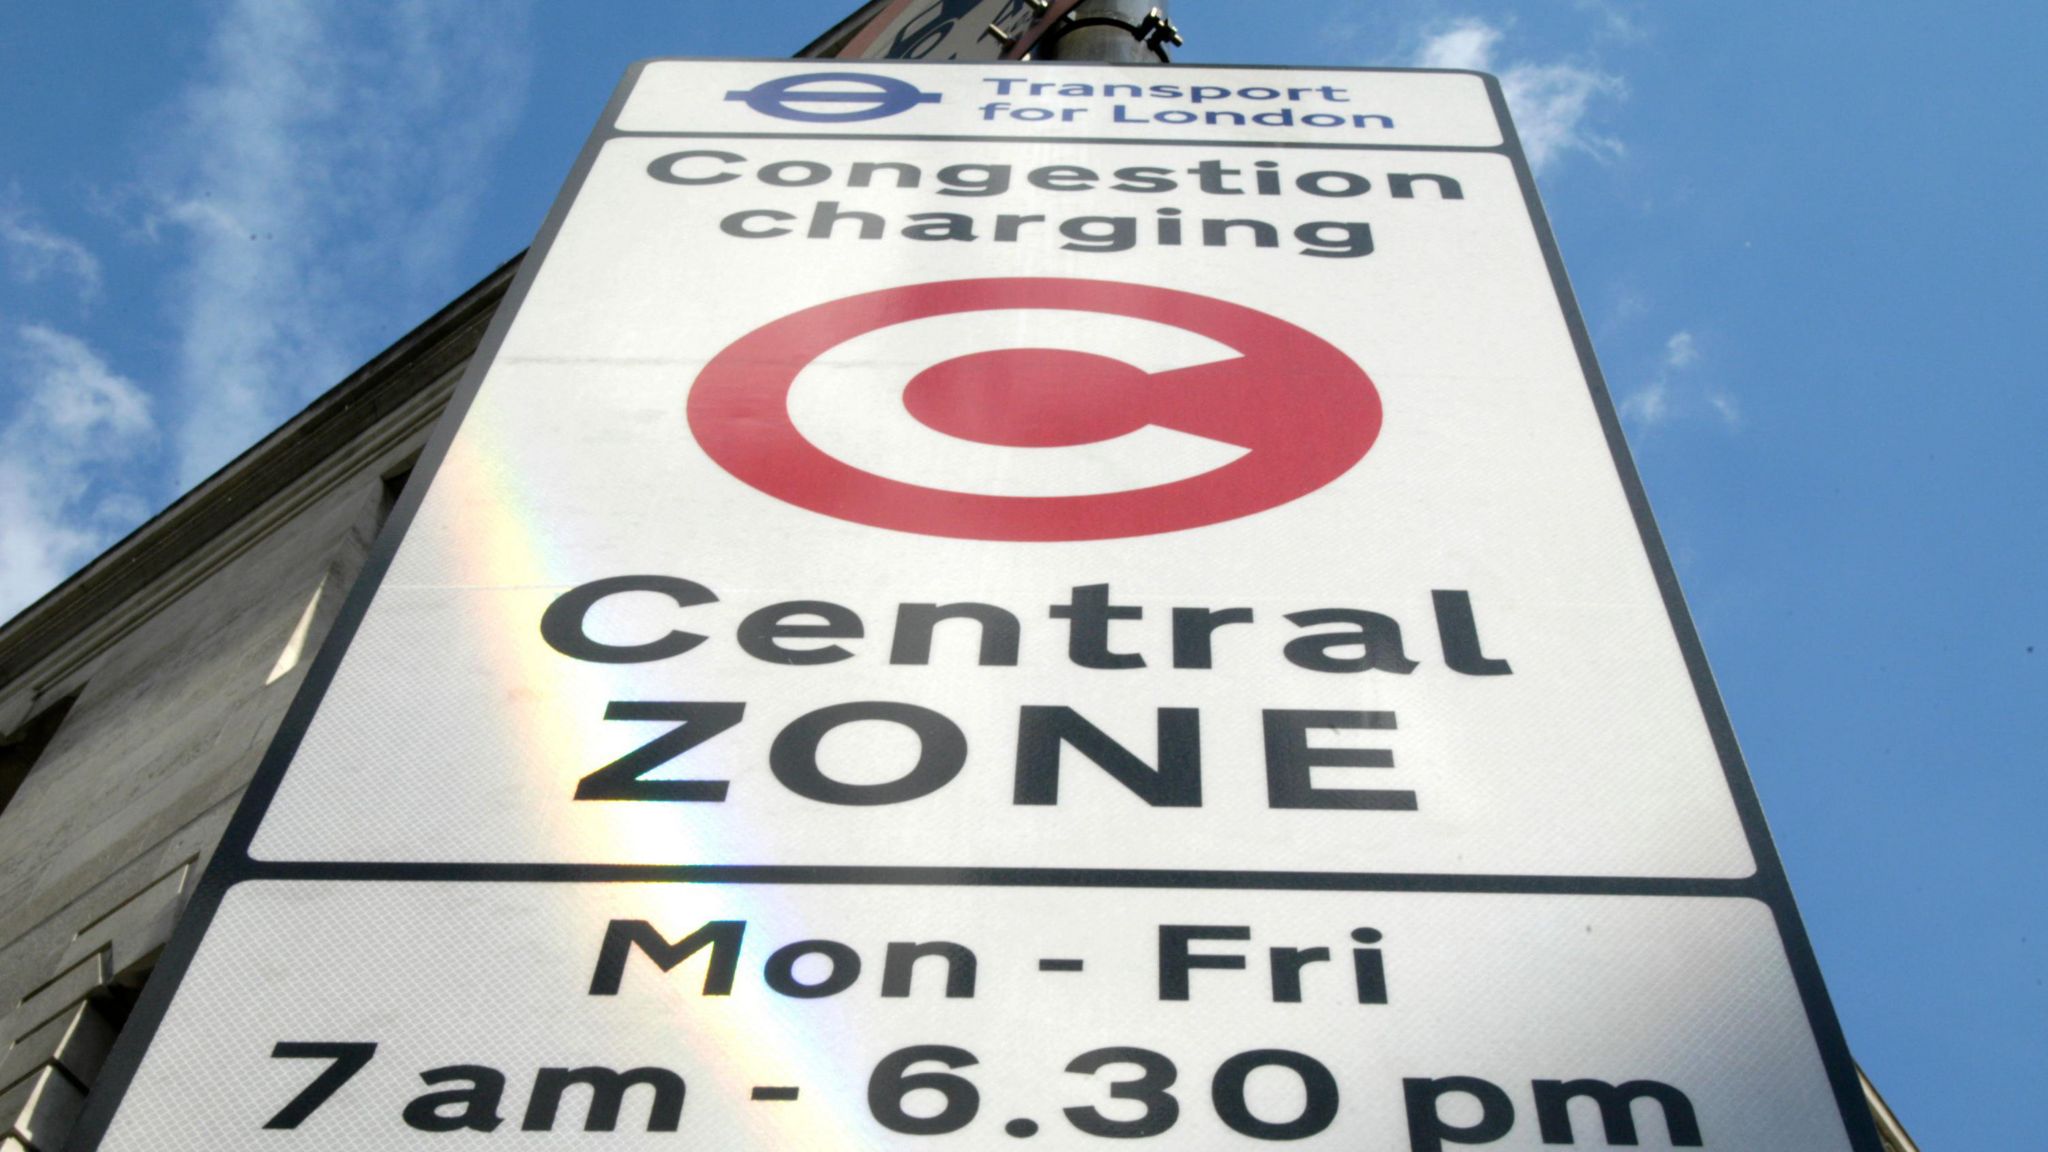 Top half of a white congestion charging zone sign in Camden